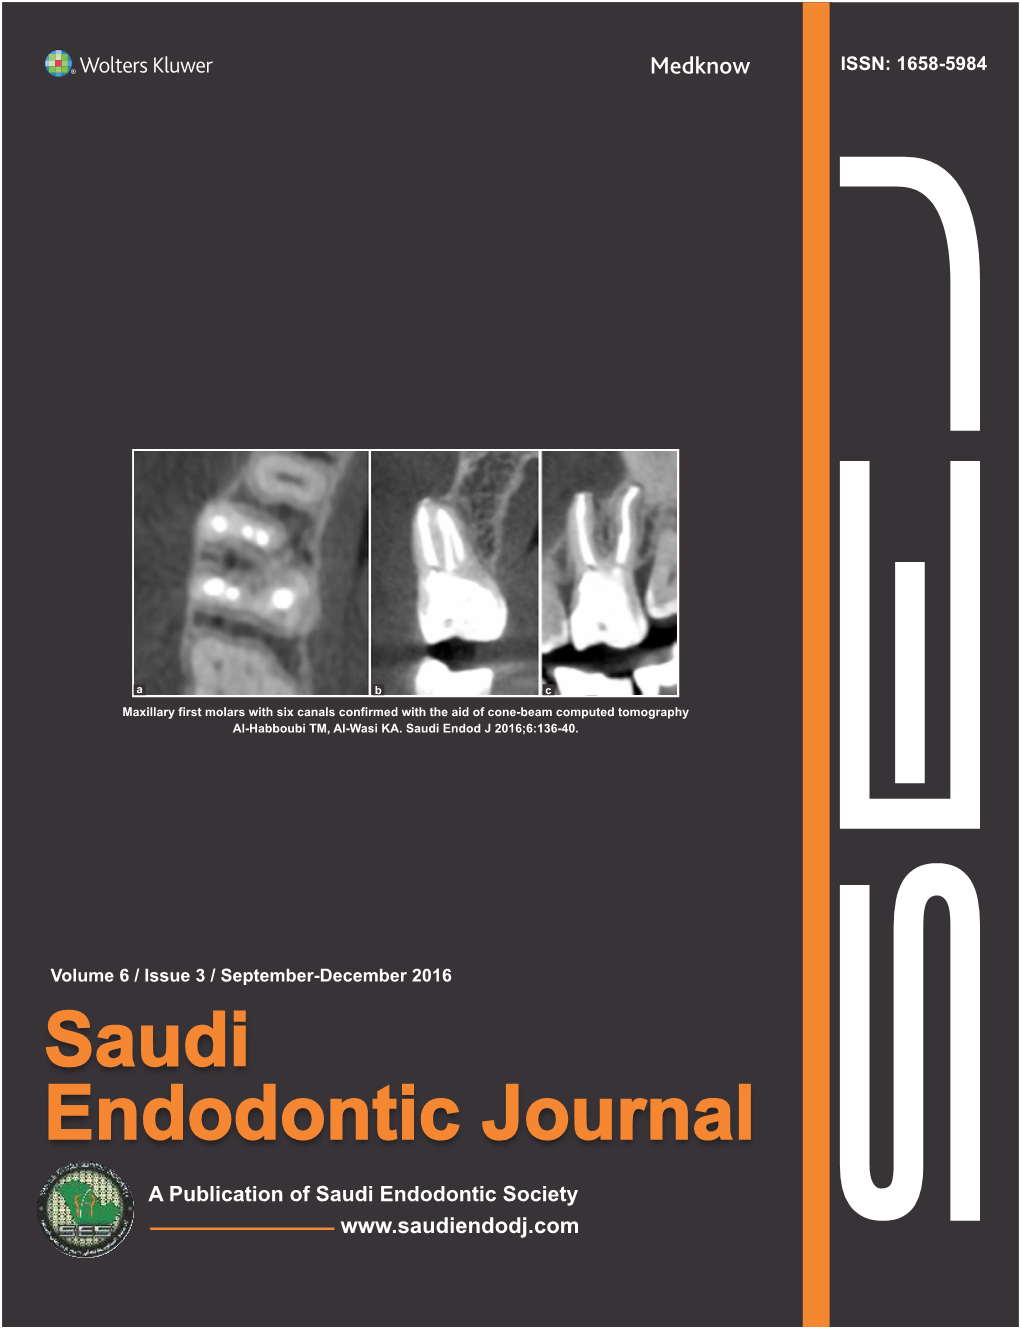 Endodontic Management of Nonrestorable Teeth in Patients at Risk of Developing Osteonecrosis of the Jaw: Case Series Eport R